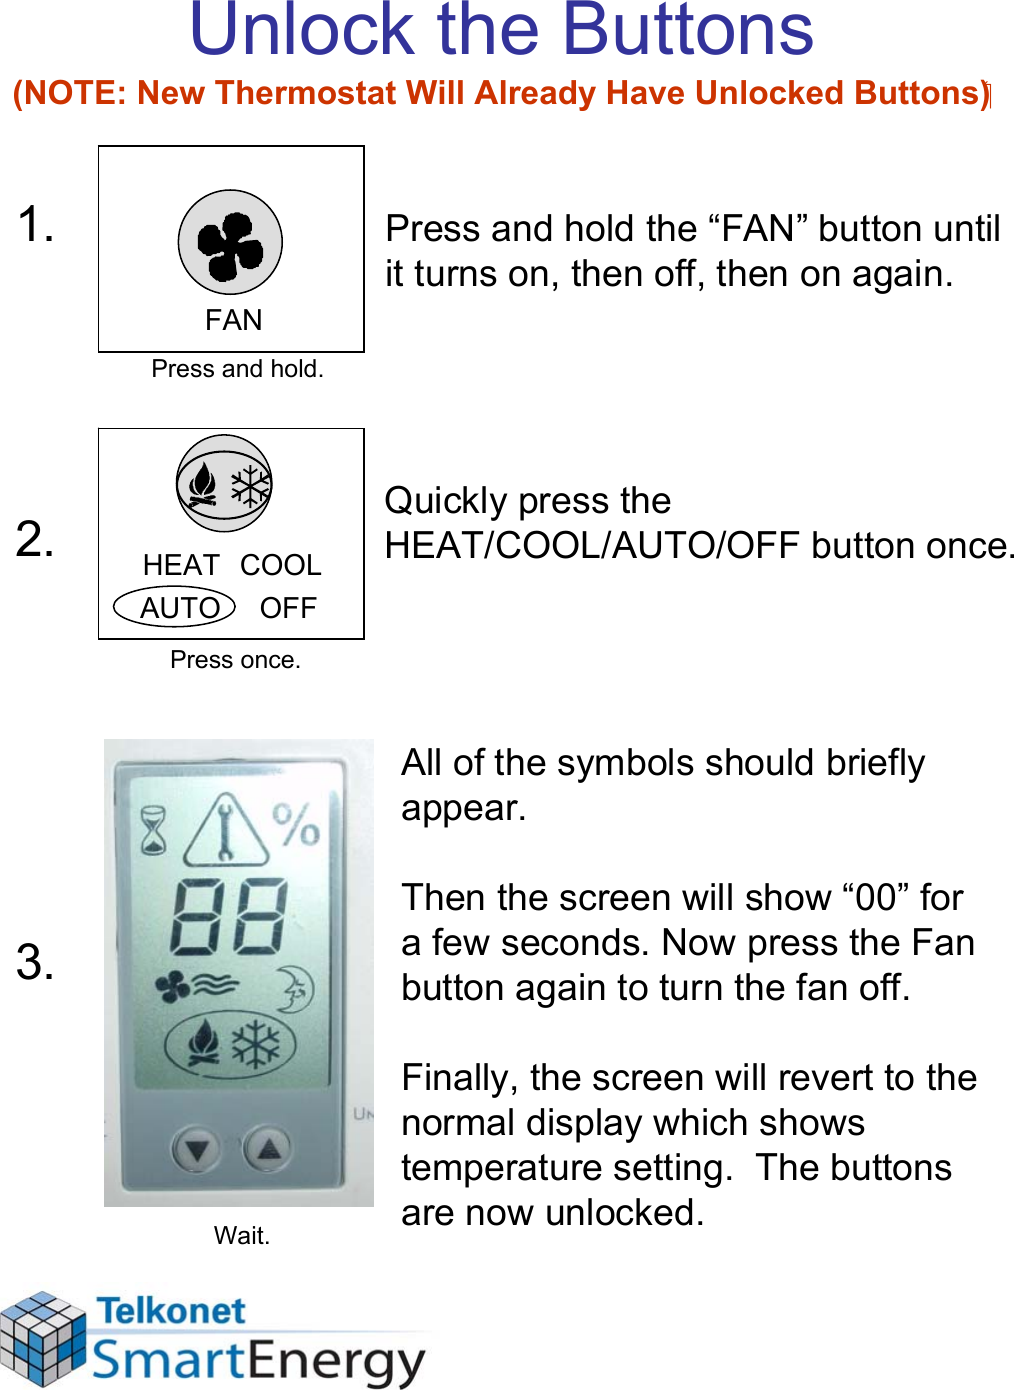 Unlock the Buttons (NOTE: New Thermostat Will Already Have Unlocked Buttons)Press and hold the “FAN” button until it turns on, then off, then on again.Quickly press the HEAT/COOL/AUTO/OFF button once.All of the symbols should briefly appear. Then the screen will show “00” for a few seconds. Now press the Fan button again to turn the fan off.Finally, the screen will revert to the normal display which shows temperature setting.  The buttons are now unlocked.FANHEAT  COOLAUTO     OFF1.2.3.Press and hold.Press once.Wait.